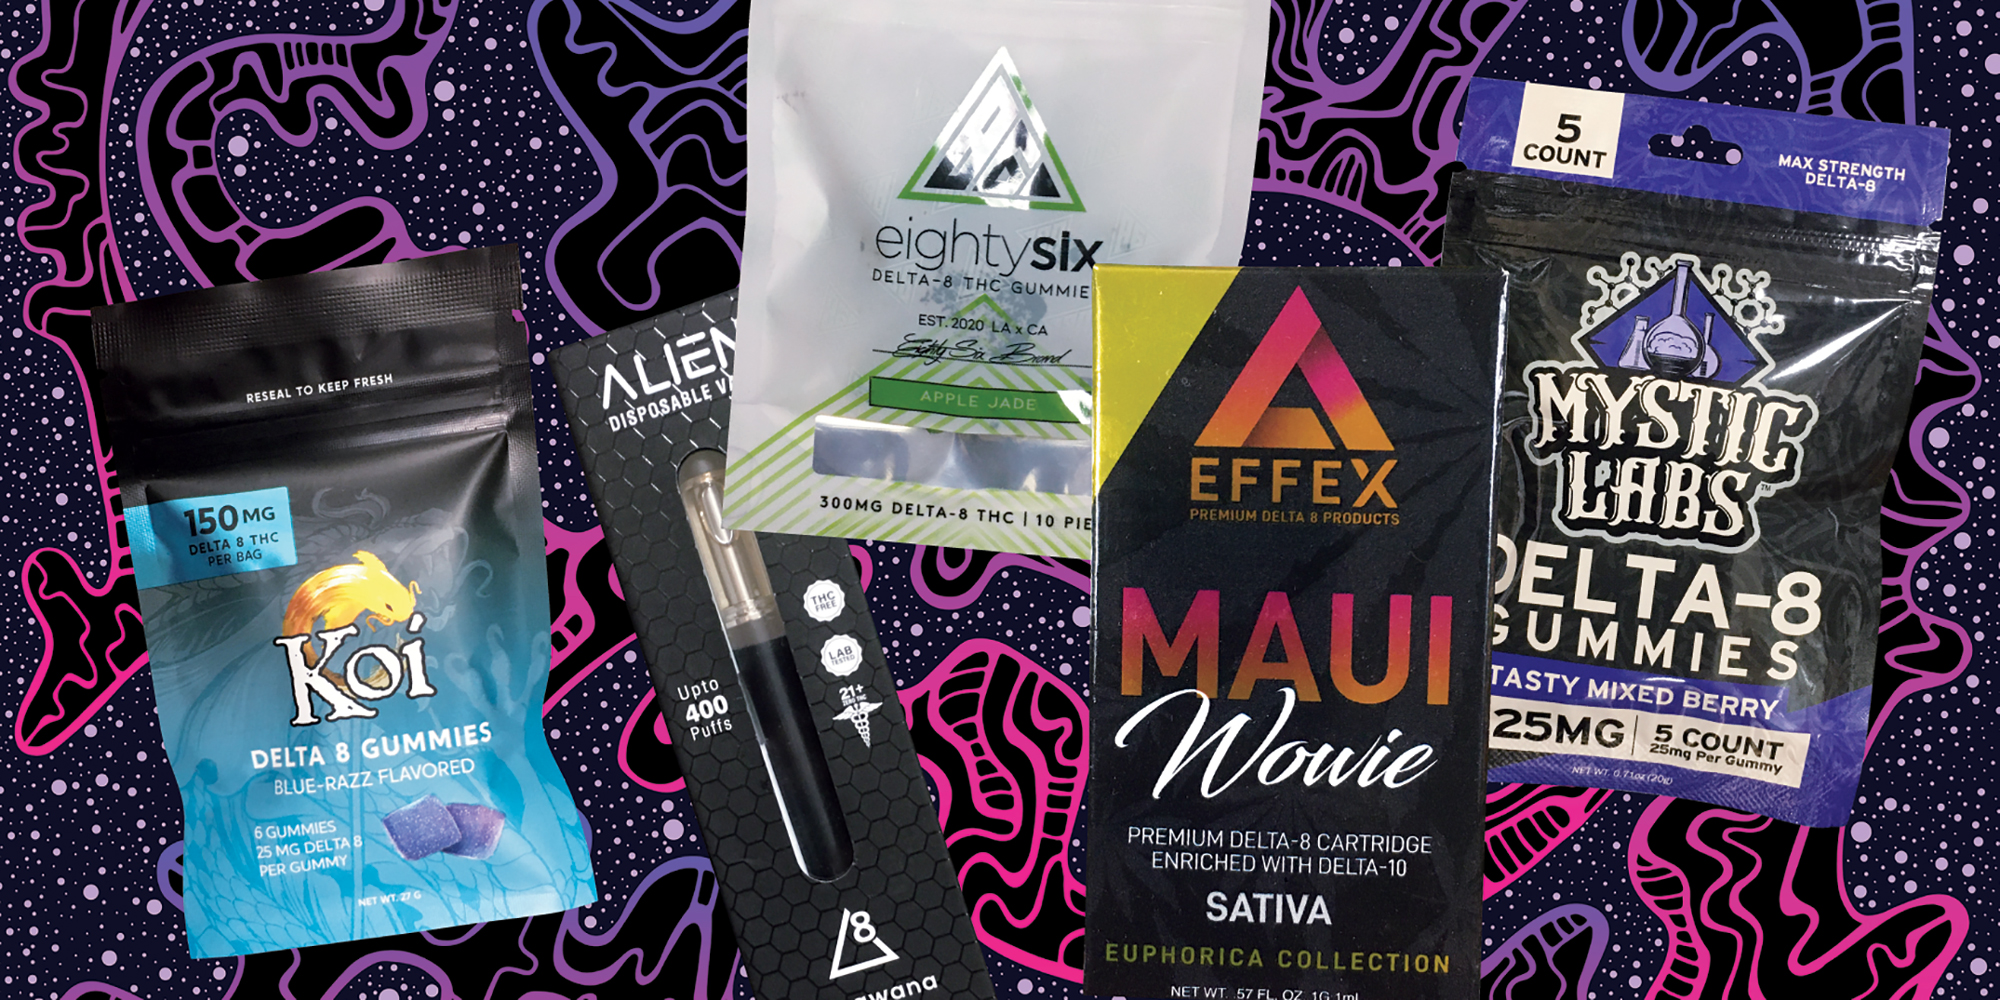 CBD OR DELTA 8 FOR SLEEP - Gummies|Thc|Products|Hemp|Product|Brand|Effects|Delta|Gummy|Cbd|Origin|Quality|Dosage|Delta-8|Dose|Usasource|Flavors|Brands|Ingredients|Range|Customers|Edibles|Cartridges|Reviews|Side|List|Health|Cannabis|Lab|Customer|Options|Benefits|Overviewproducts|Research|Time|Market|Drug|Farms|Party|People|Delta-8 Thc|Delta-8 Products|Delta-9 Thc|Delta-8 Gummies|Delta-8 Thc Products|Delta-8 Brands|Customer Reviews|Brand Overviewproducts|Drug Tests|Free Shipping|Similar Benefits|Vape Cartridges|Hemp Doctor|United States|Third Party Lab|Drug Test|Thc Edibles|Health Canada|Cannabis Plant|Side Effects|Organic Hemp|Diamond Cbd|Reaction Time|Legal Hemp|Psychoactive Effects|Psychoactive Properties|Third Party|Dry Eyes|Delta-8 Market|Tolerance Level